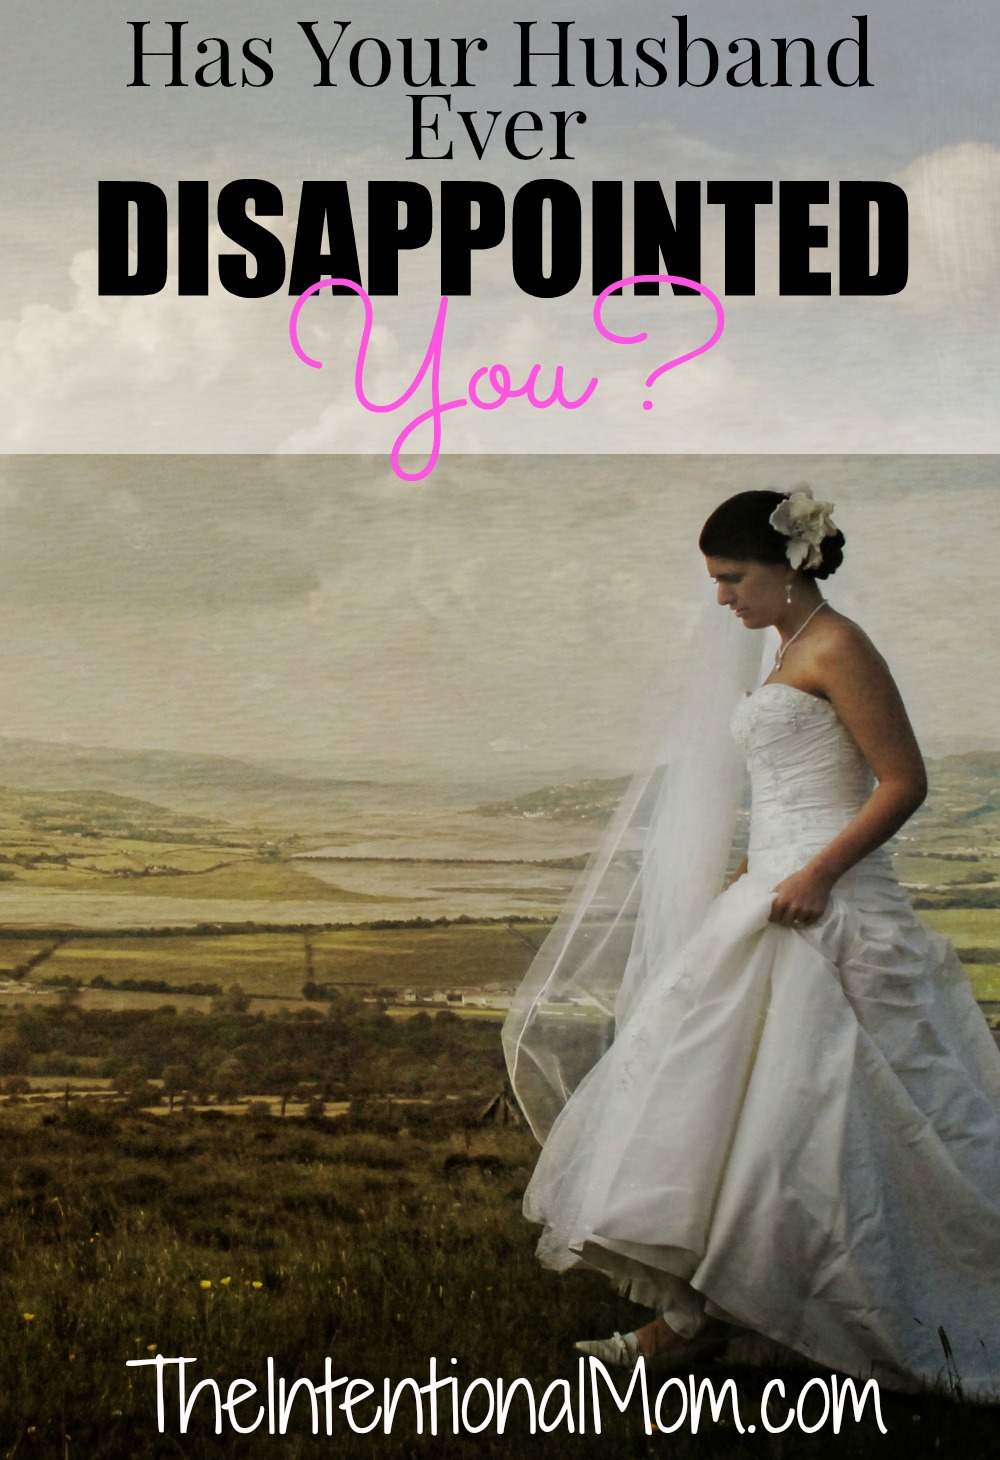 Has Your Husband Ever Disappointed You?